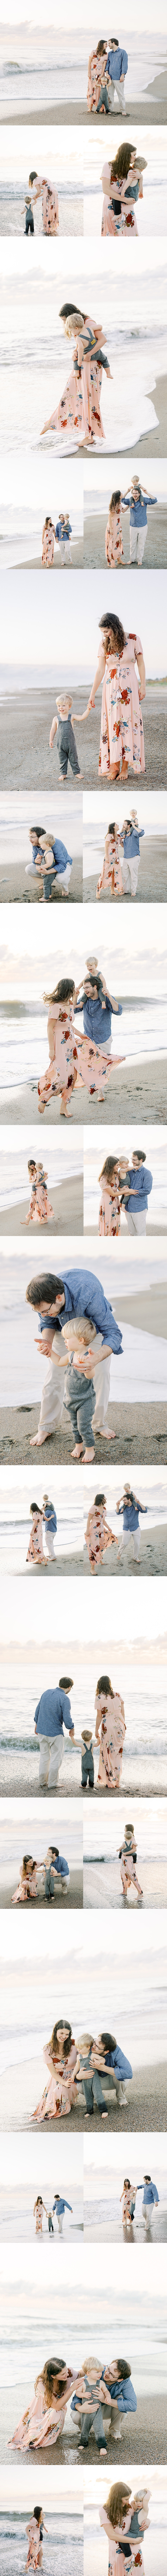 Tybee Island Family Photography Beach Sessions